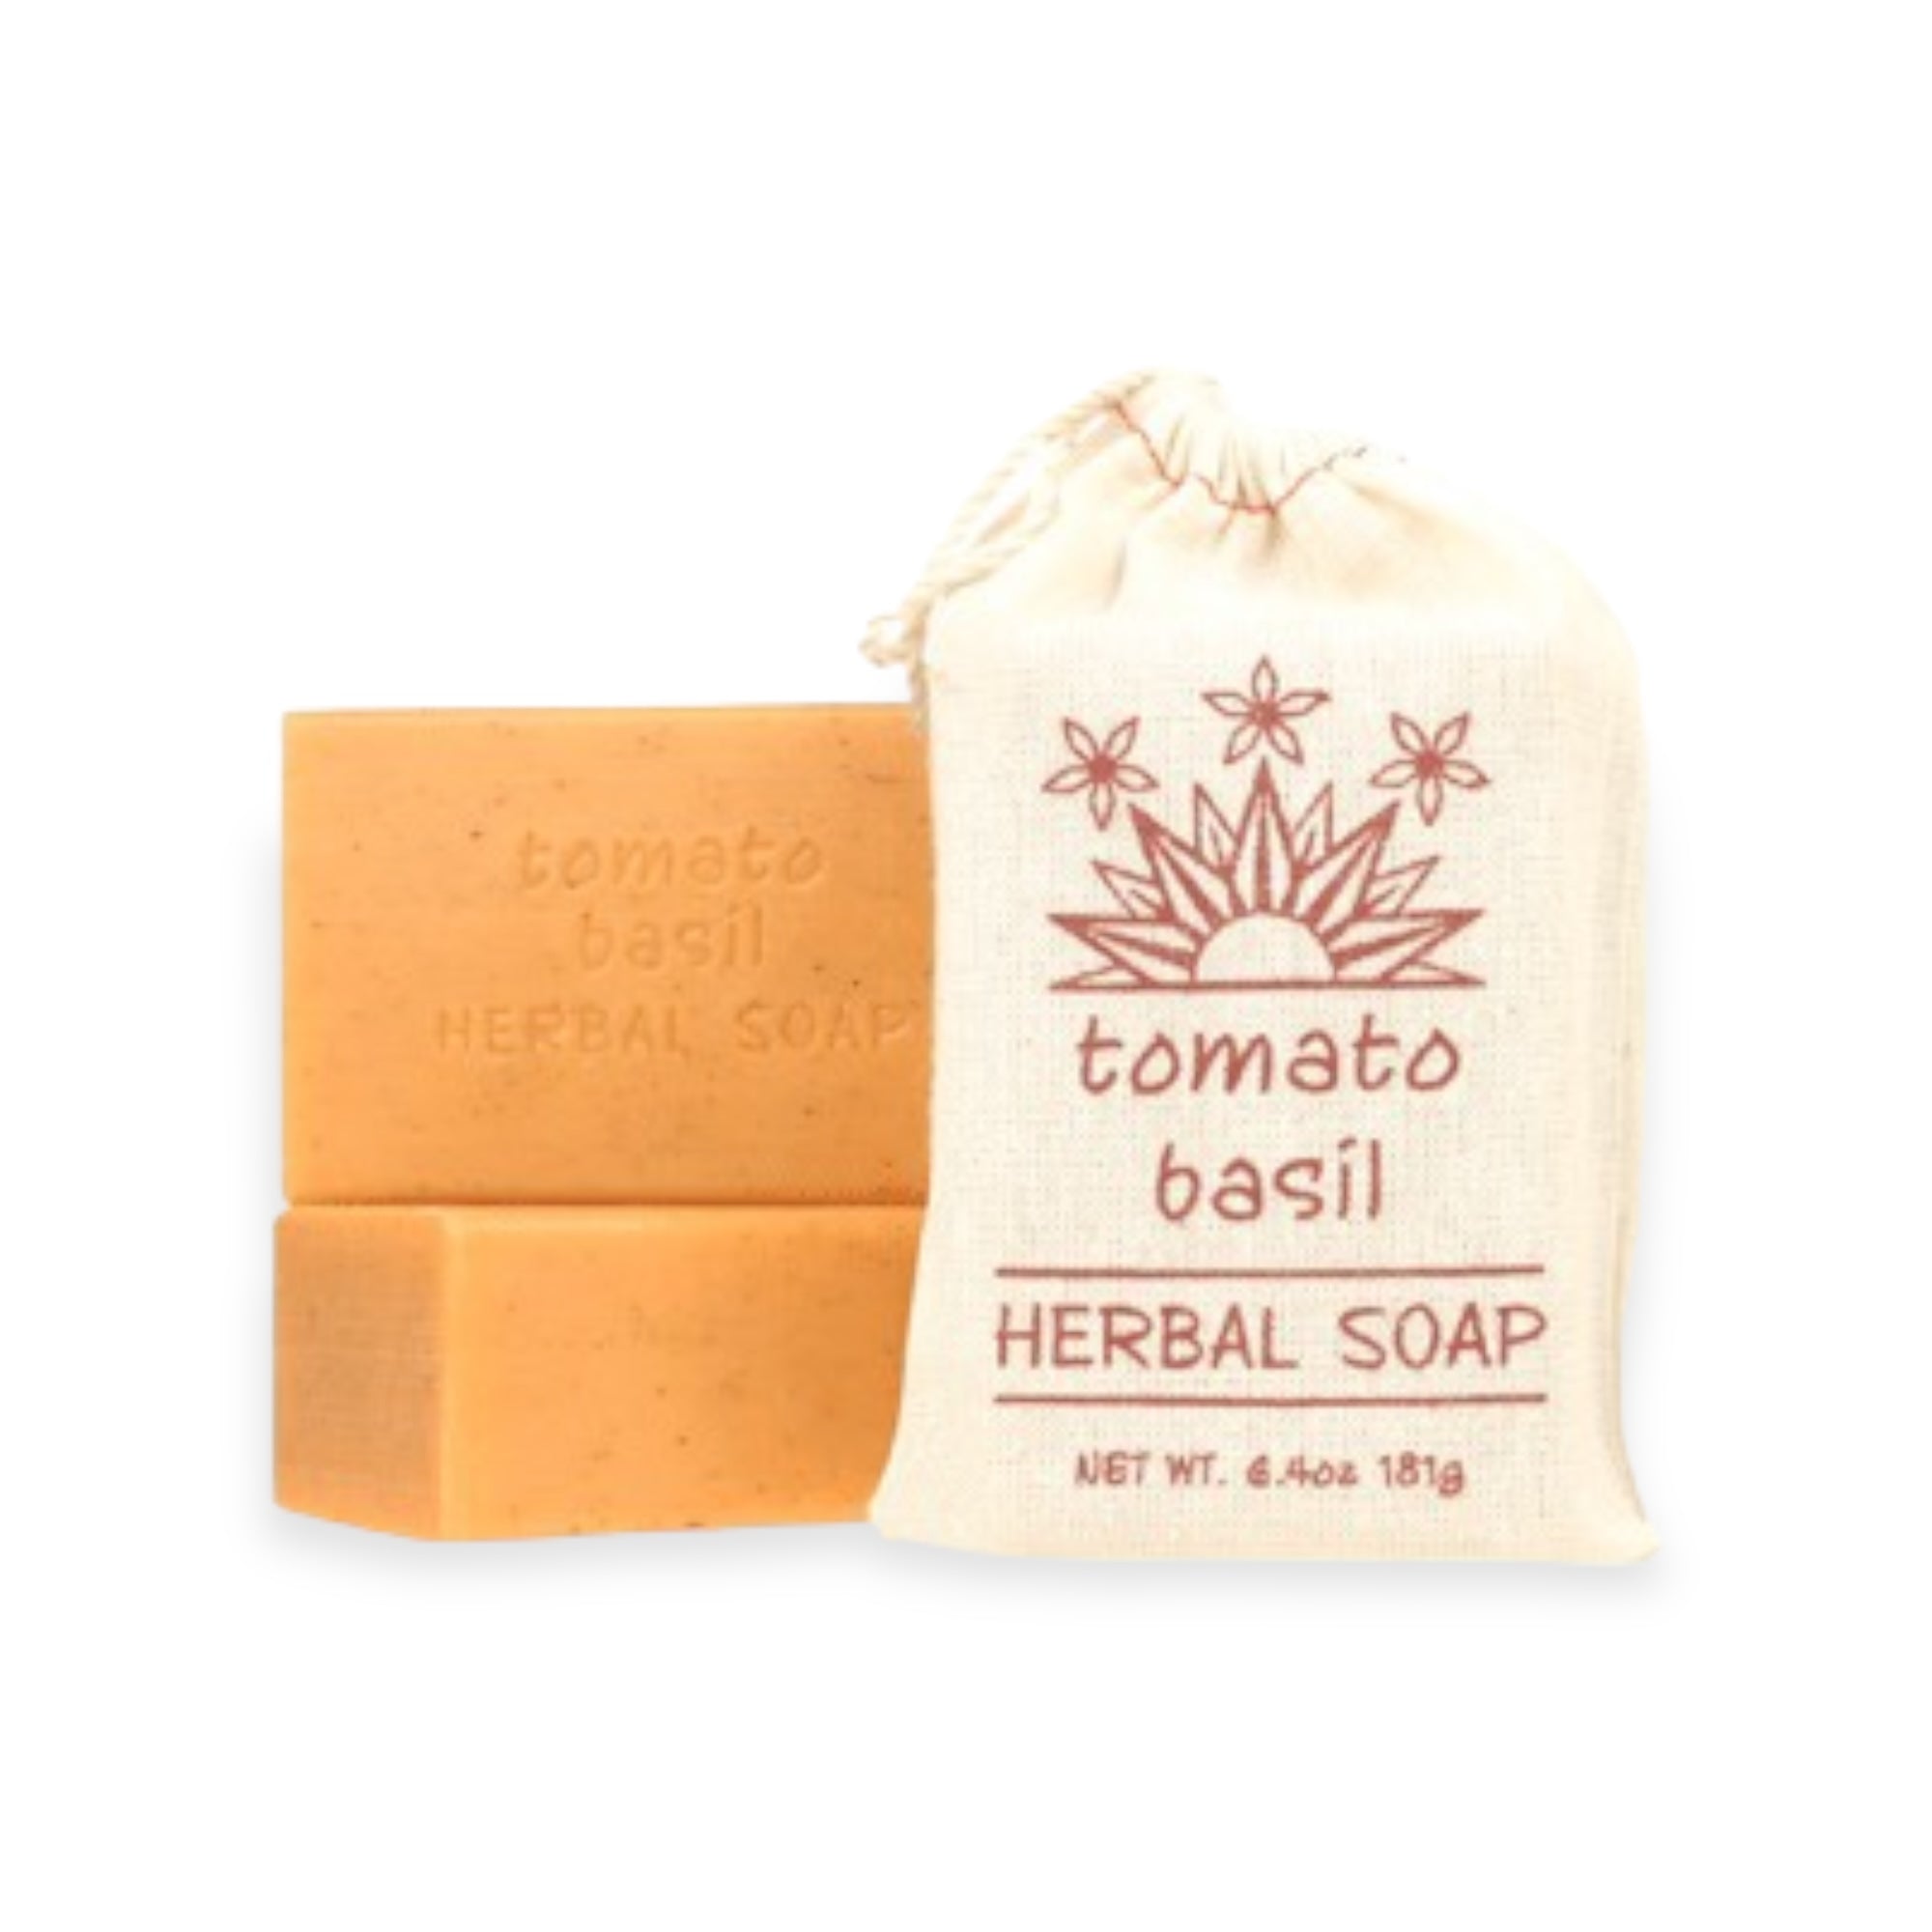 Tomato Basil Herbal Soap by Greenwich Bay Trading Co.